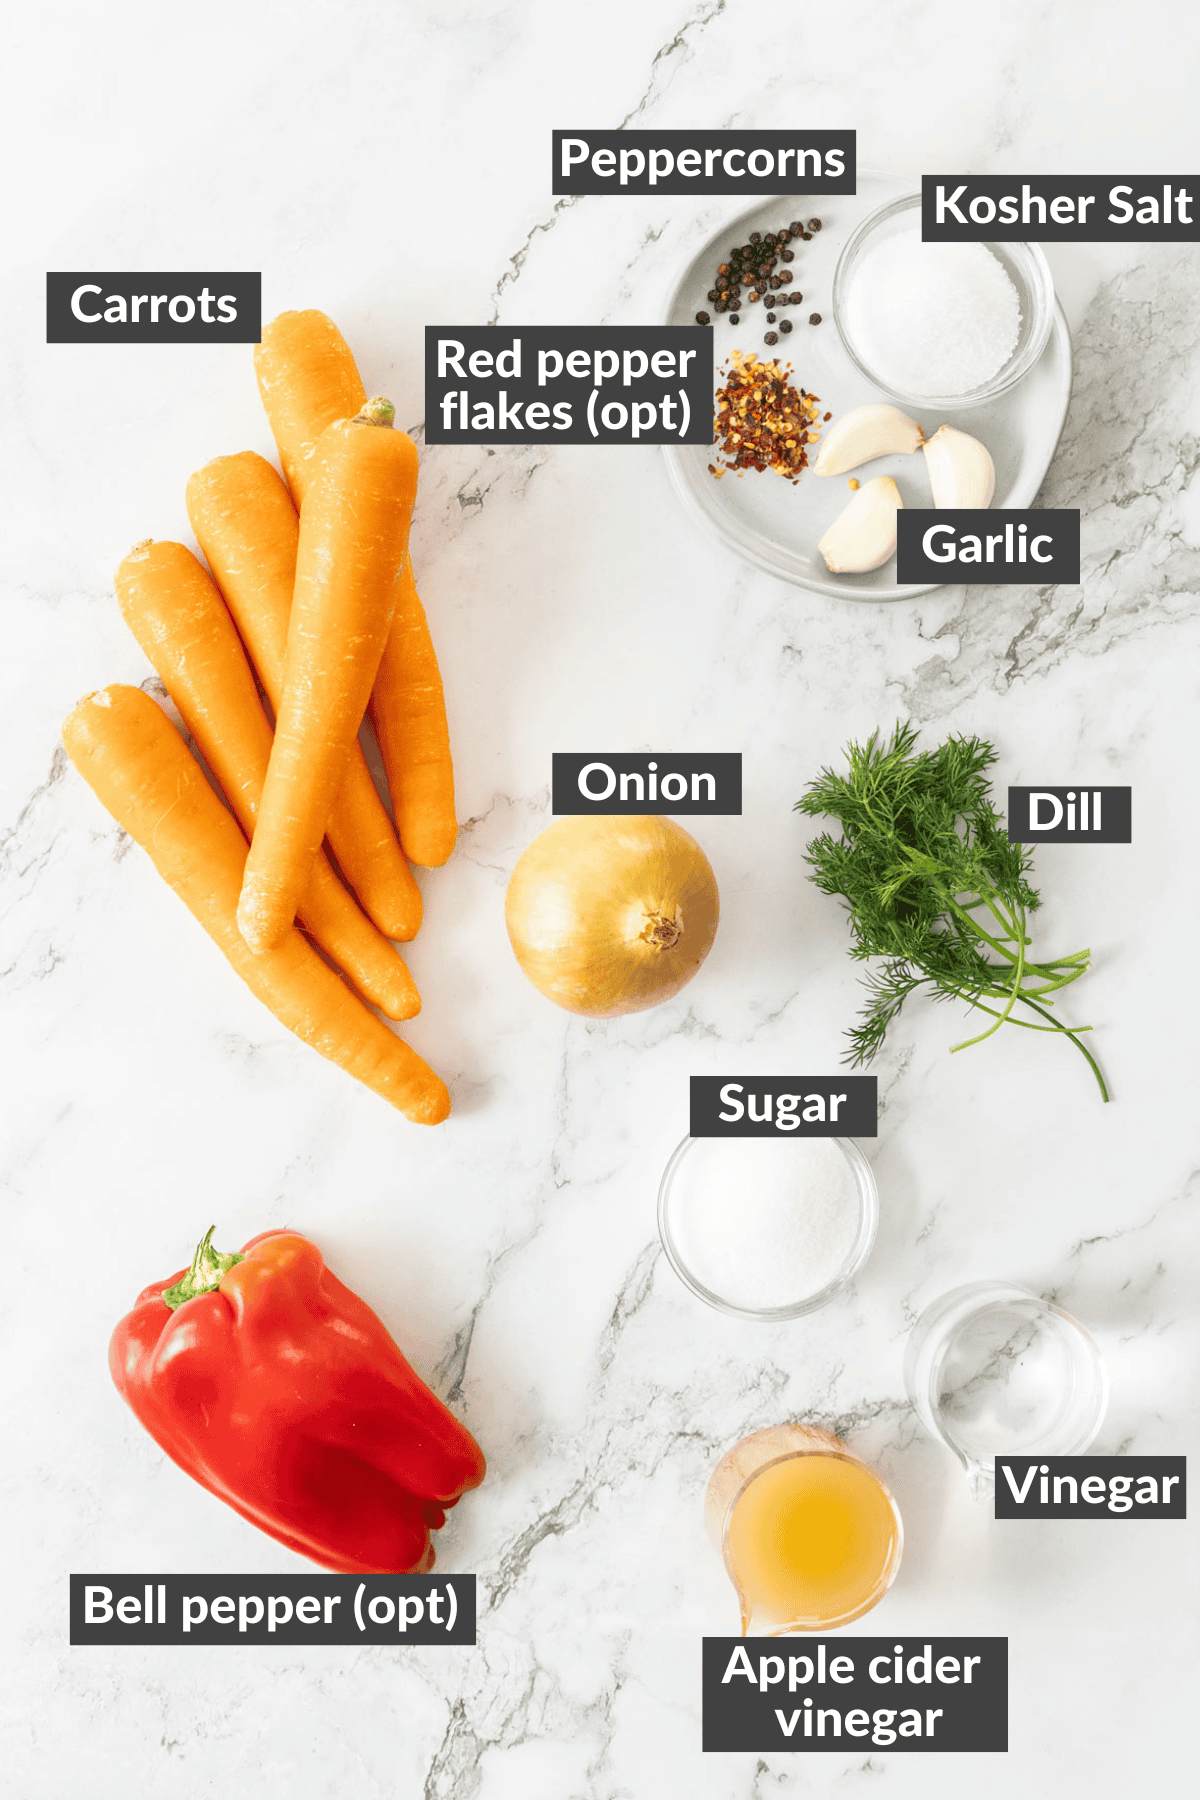 Carrots, onions, garlic, dill, and other ingredients on a marbled board.